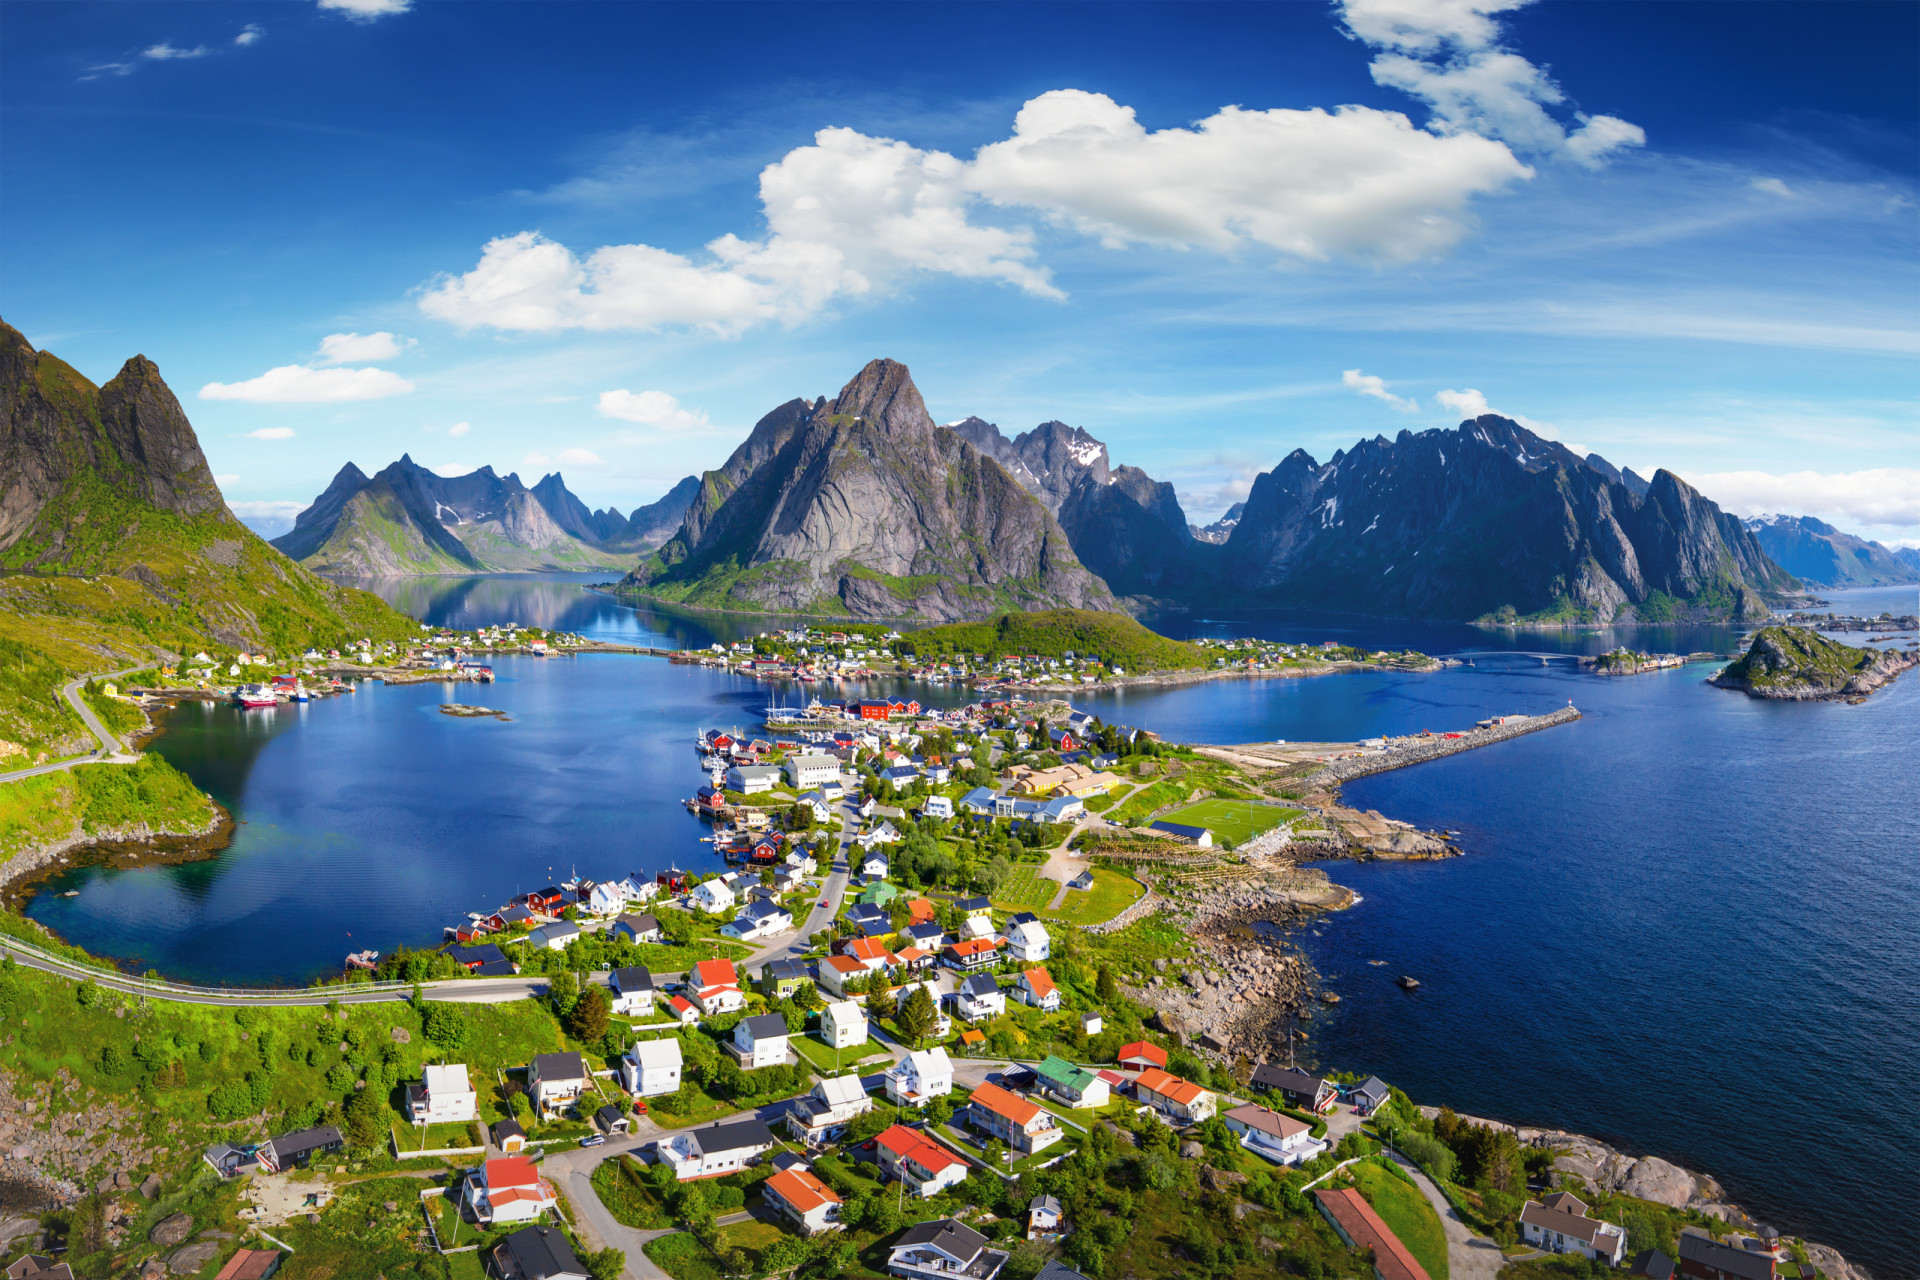 <p>Similarly, coastal Norway unveils itself in spectacular fashion when viewed from the deck of a cruise ship. And for landlubbers, there's an enviable choice of luxury hotels to check into serving cities like Oslo, Kristiansand, and Bergen.</p><p>You may also like:<a href="https://www.starsinsider.com/n/494354?utm_source=msn.com&utm_medium=display&utm_campaign=referral_description&utm_content=636762en-en_selected"> Movies where the protagonist dies</a></p>